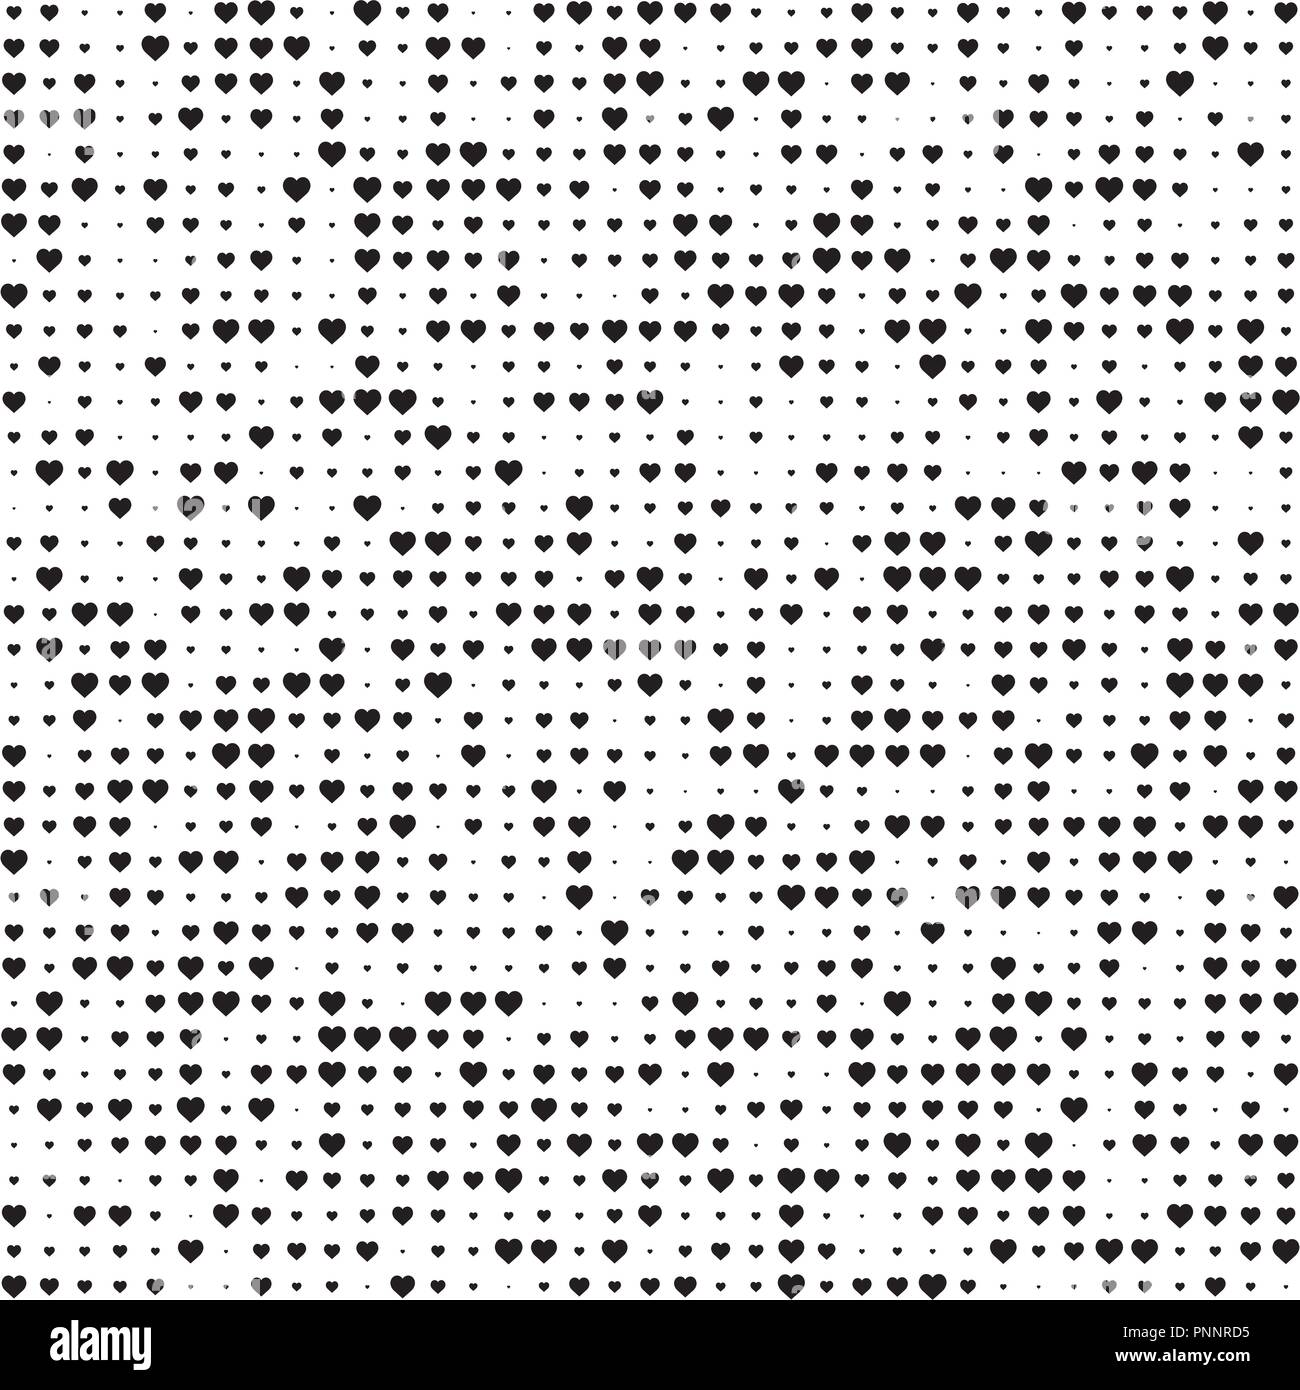 halftone dots pattern vector background eps 10 Stock Vector